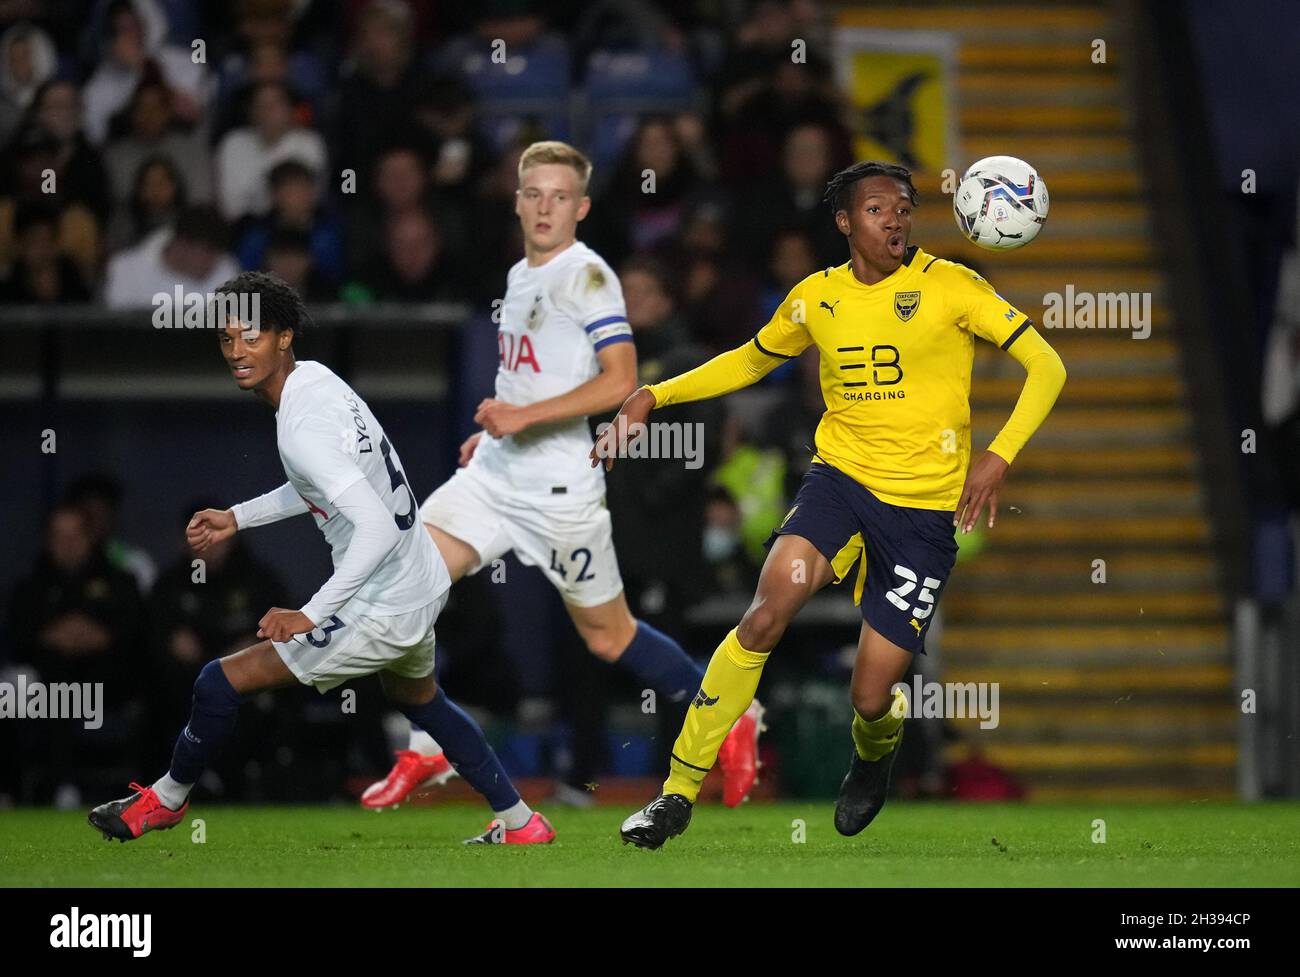 Oxford, UK. 26th Oct, 2021. Josh Johnson of Oxford United & Brooklyn Lyons-Foster (left) of Spurs U21 during the EFL Trophy match between Oxford United and Tottenham Hotspur U21 at the Kassam Stadium, Oxford, England on 26 October 2021. Photo by Andy Rowland. Credit: PRiME Media Images/Alamy Live News Stock Photo